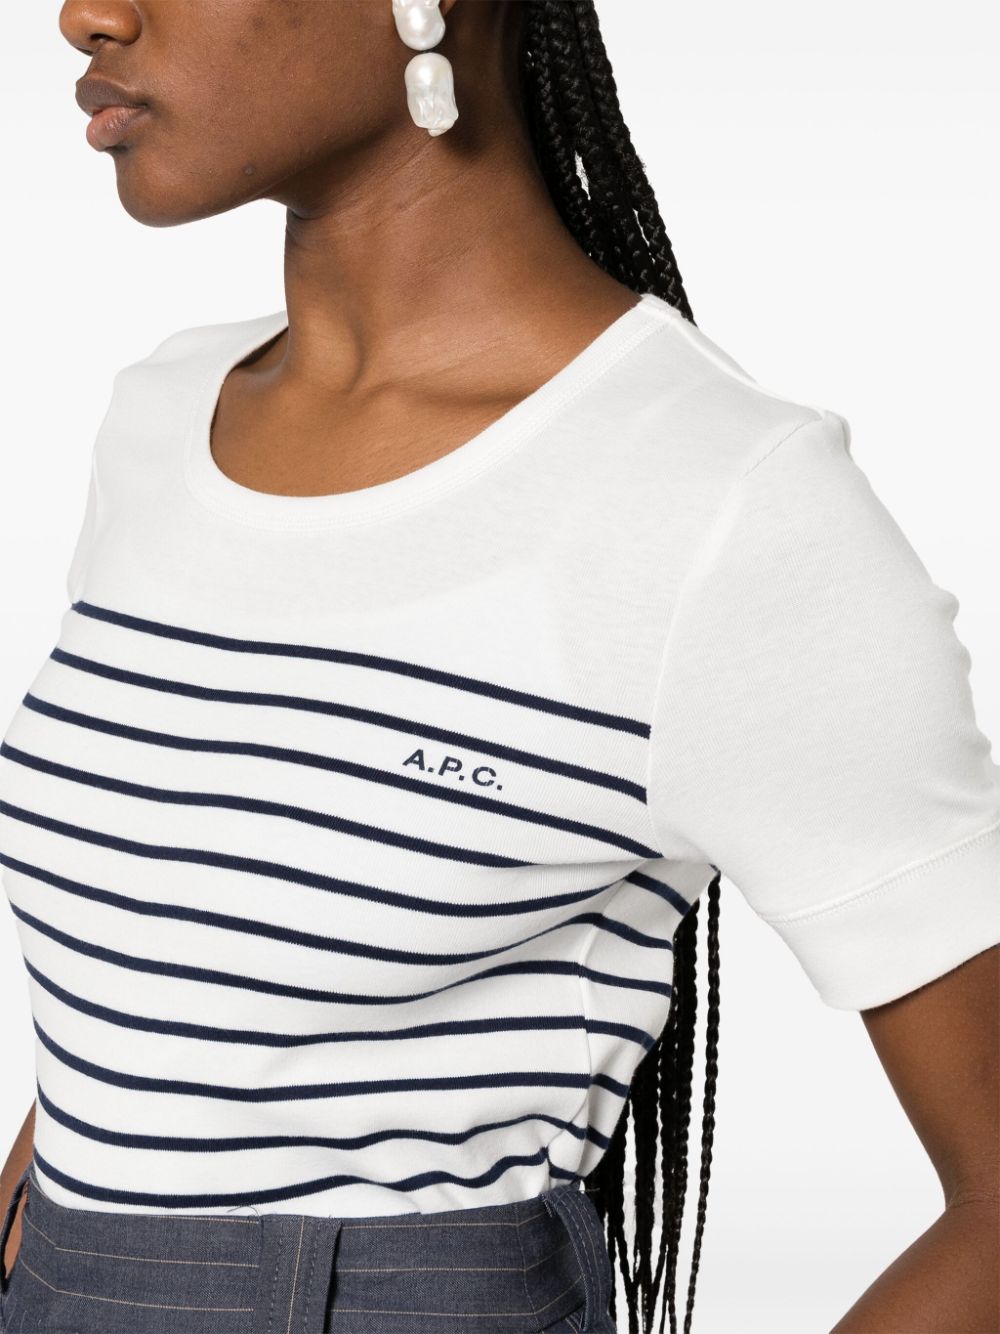 T-shirt in cotone a righe<br><br><br>